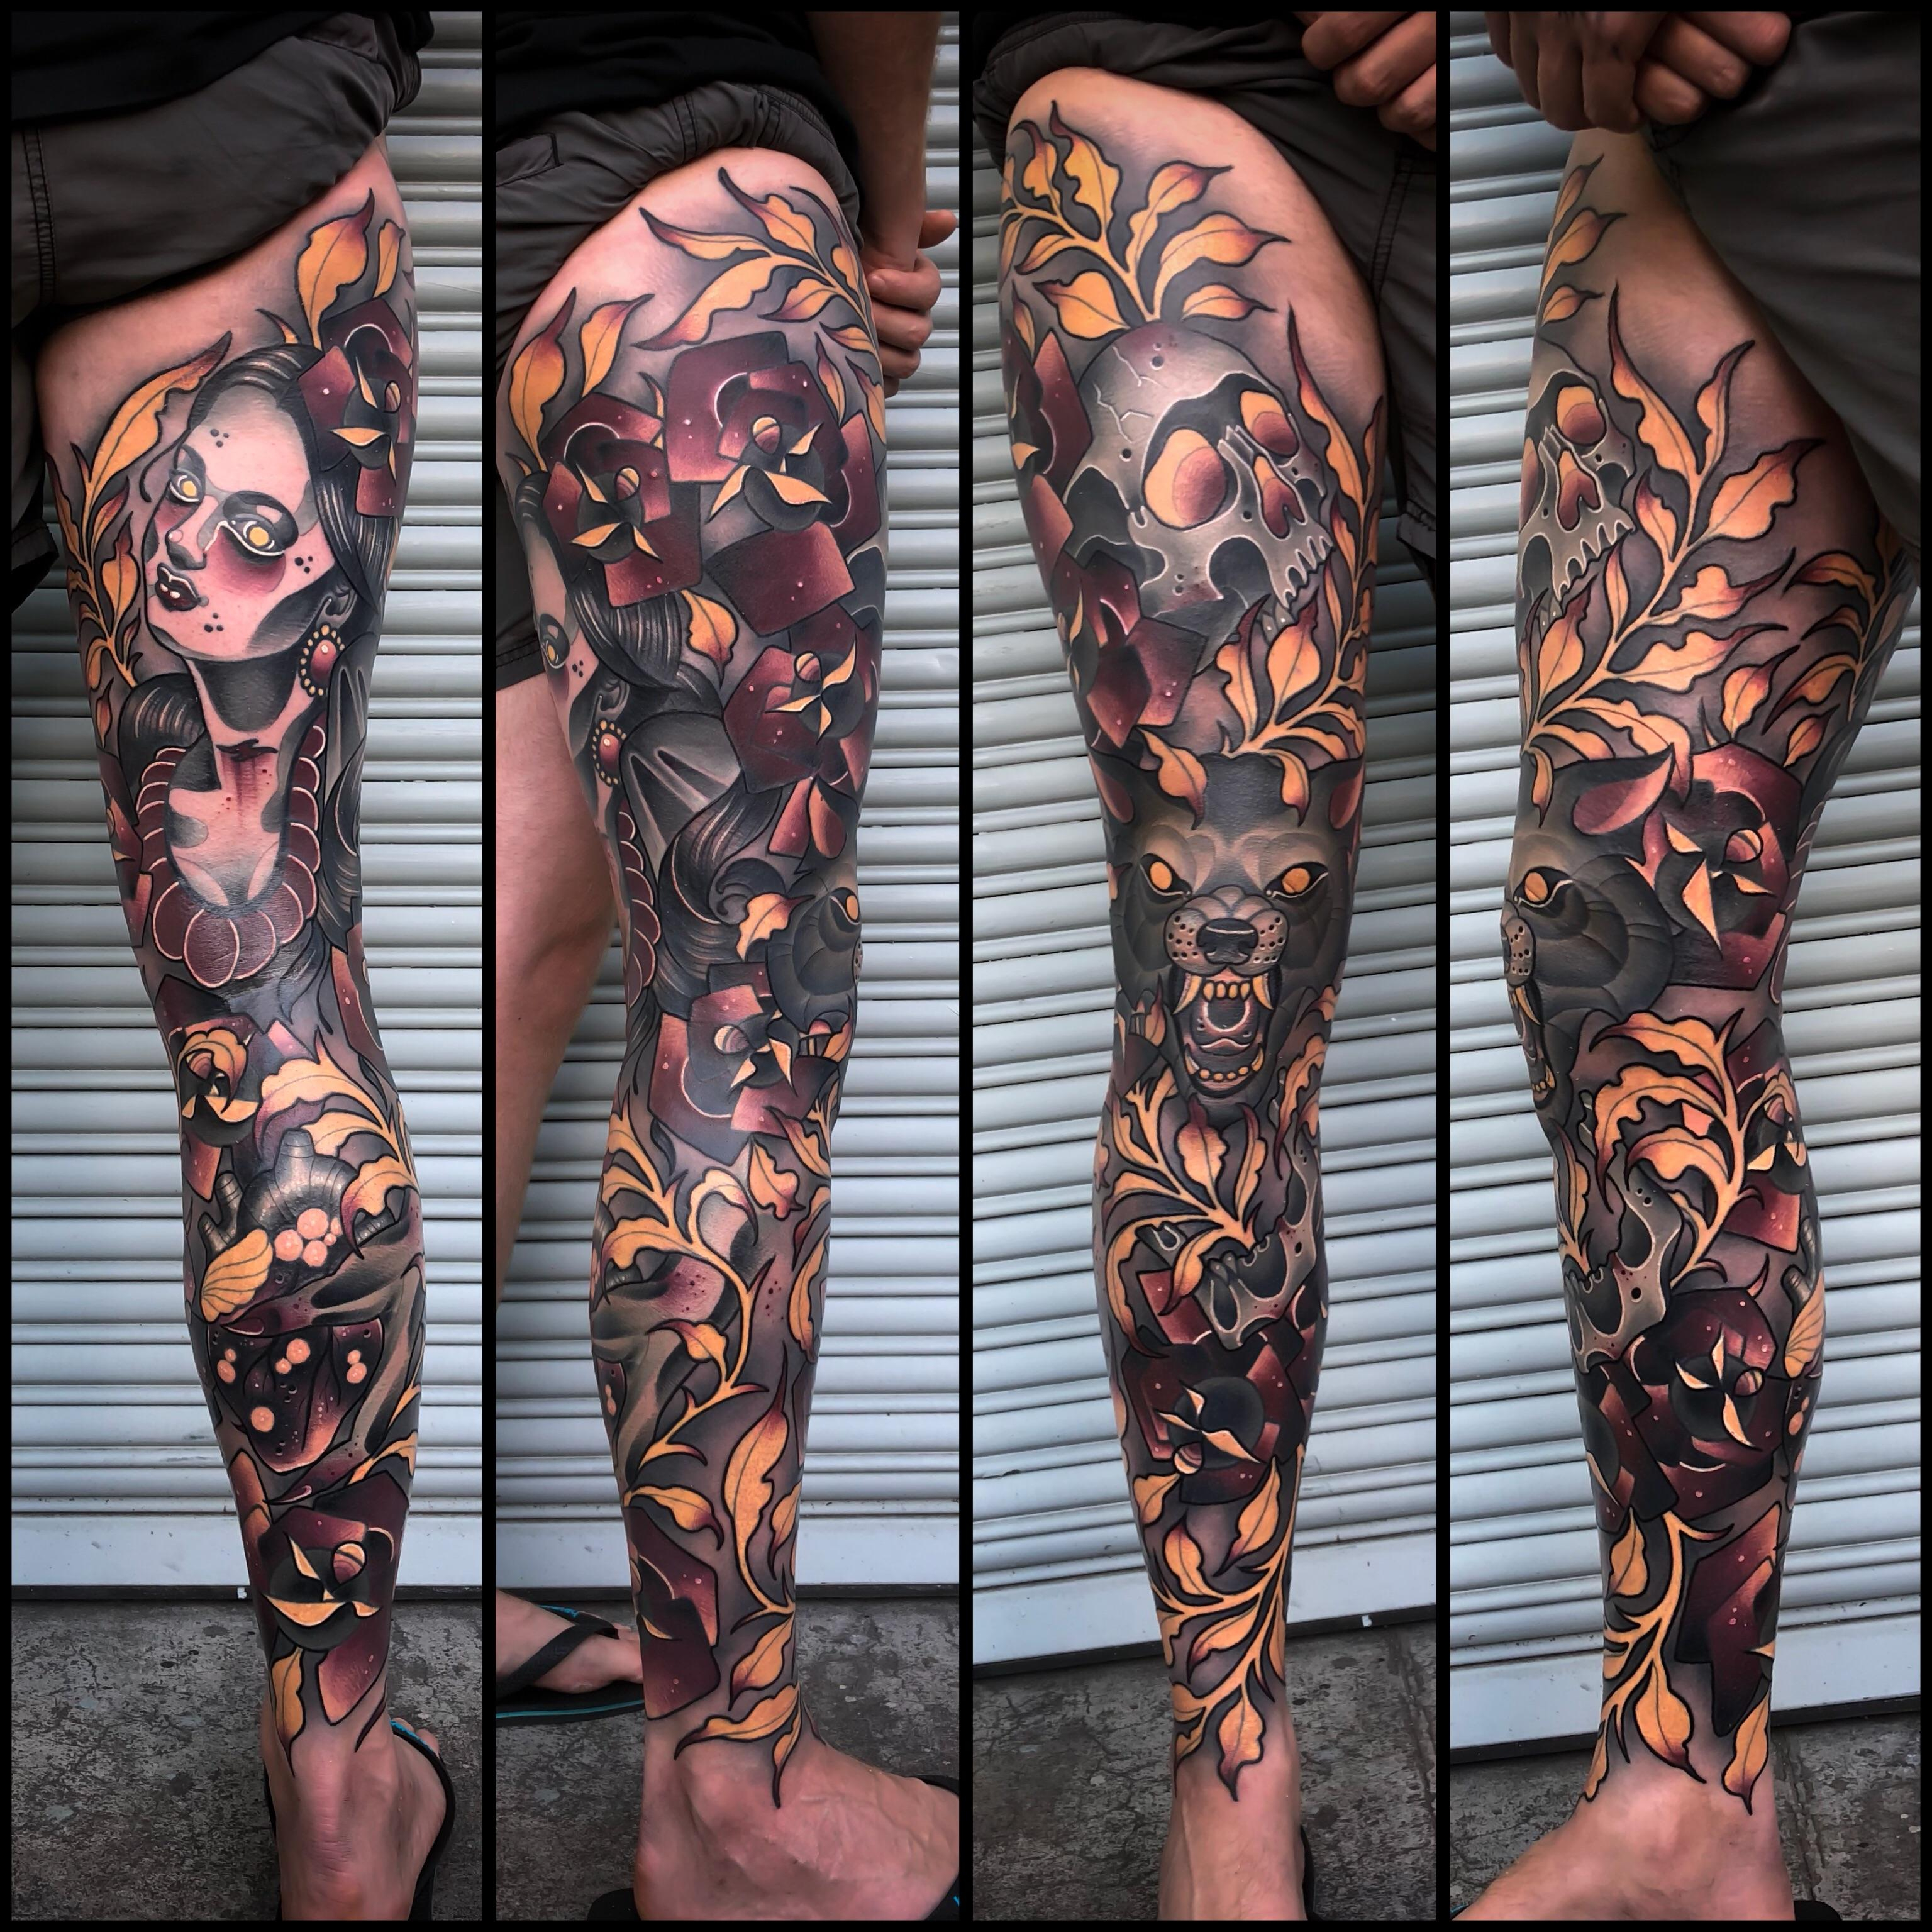 My Leg Sleeve Matt Curzon Out Of Empire In Prahran Melbourne inside sizing 3072 X 3072